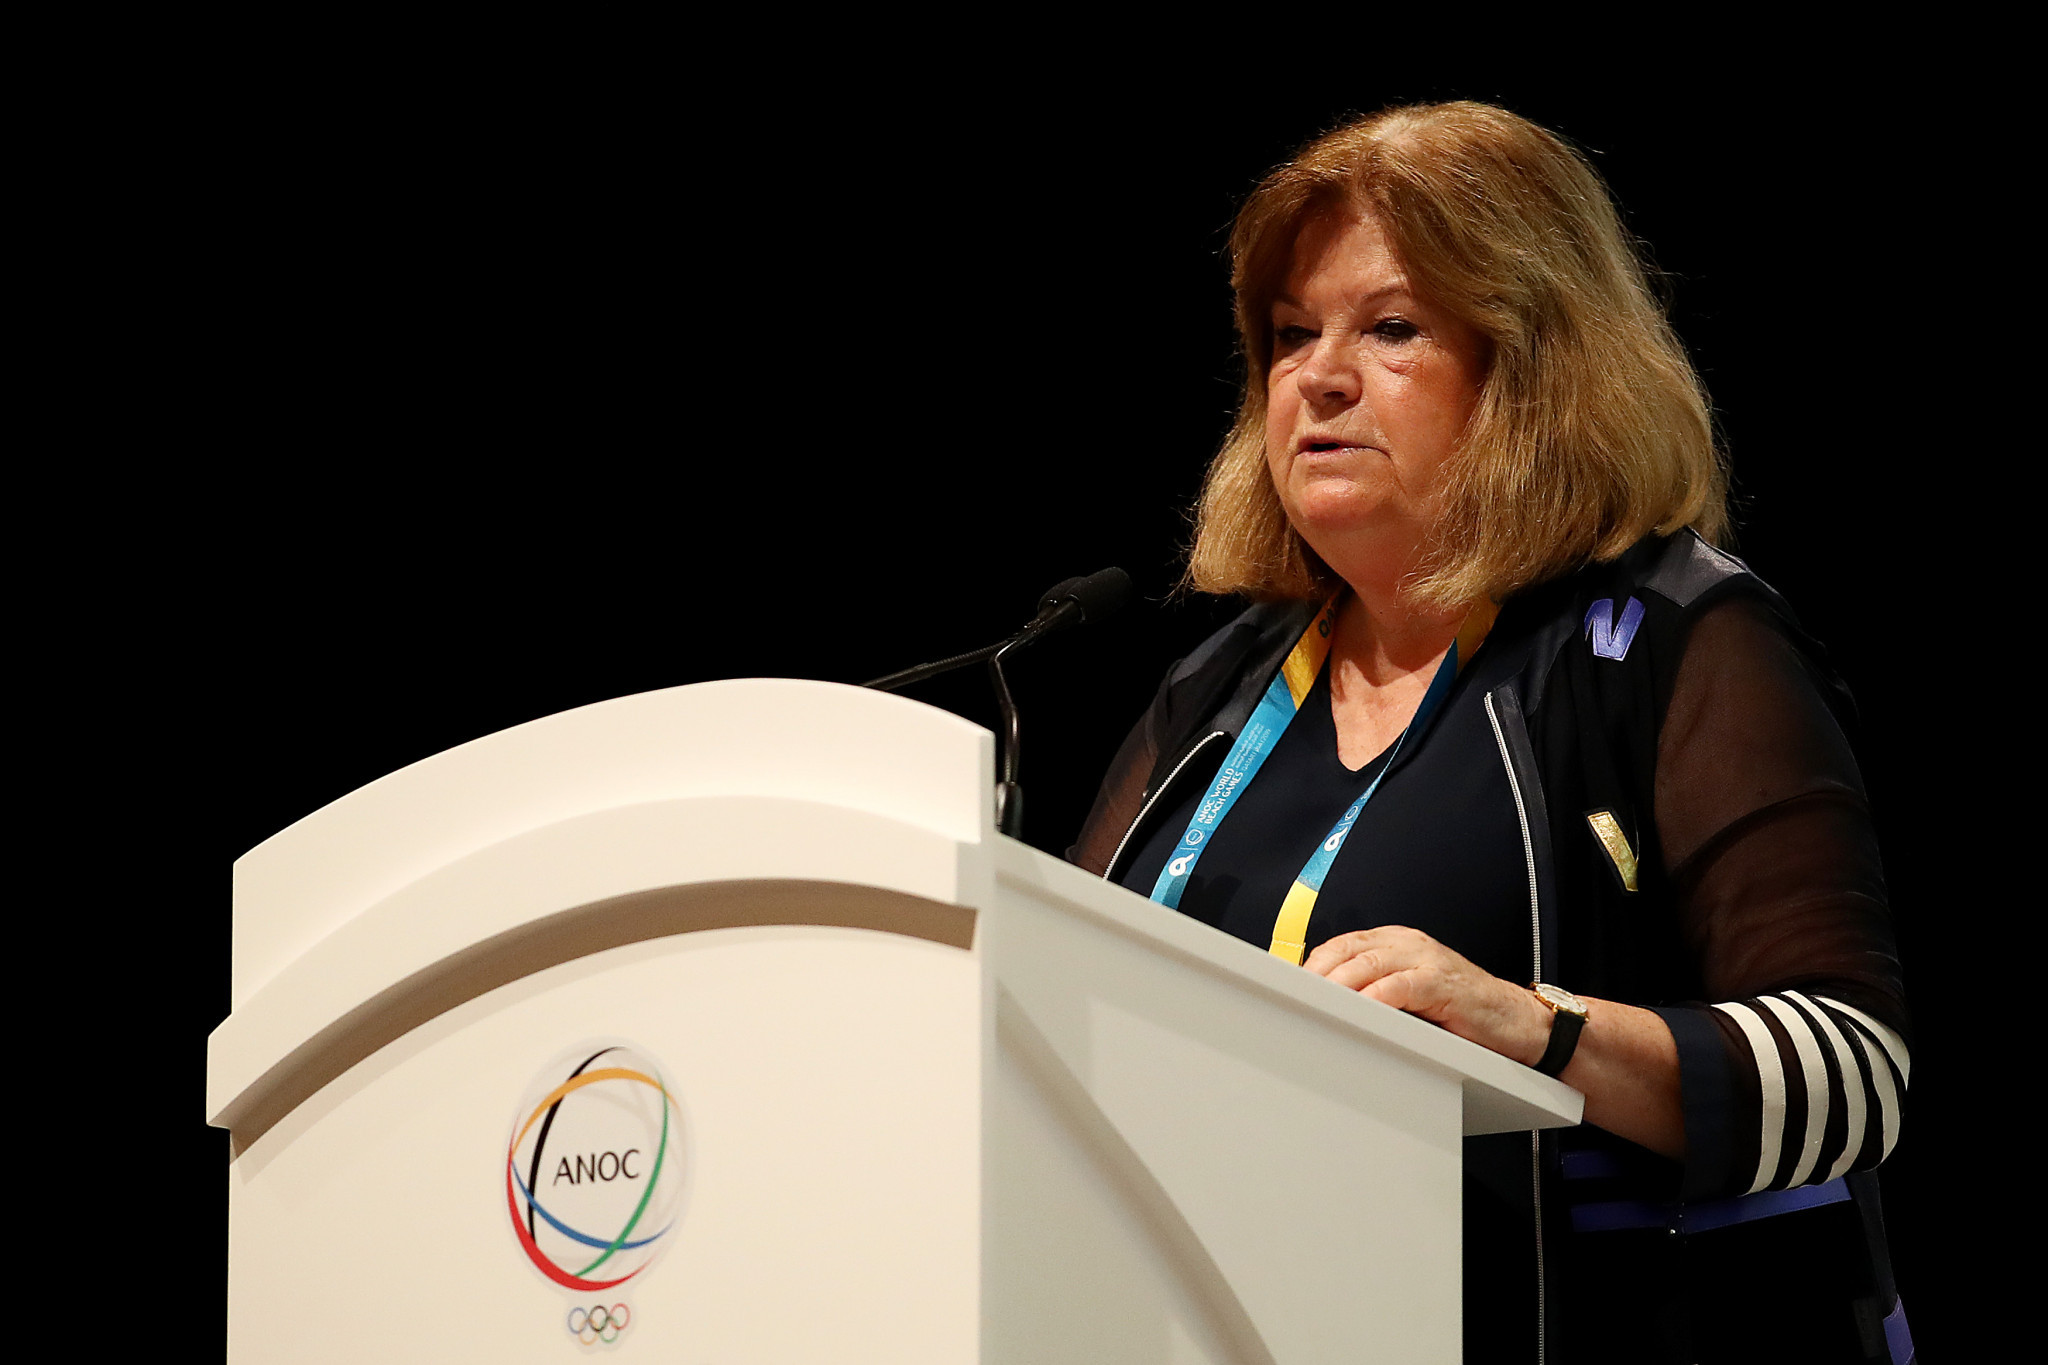 Swedish official Gunilla Lindberg, the secretary general of ANOC, commented that the organisation is 